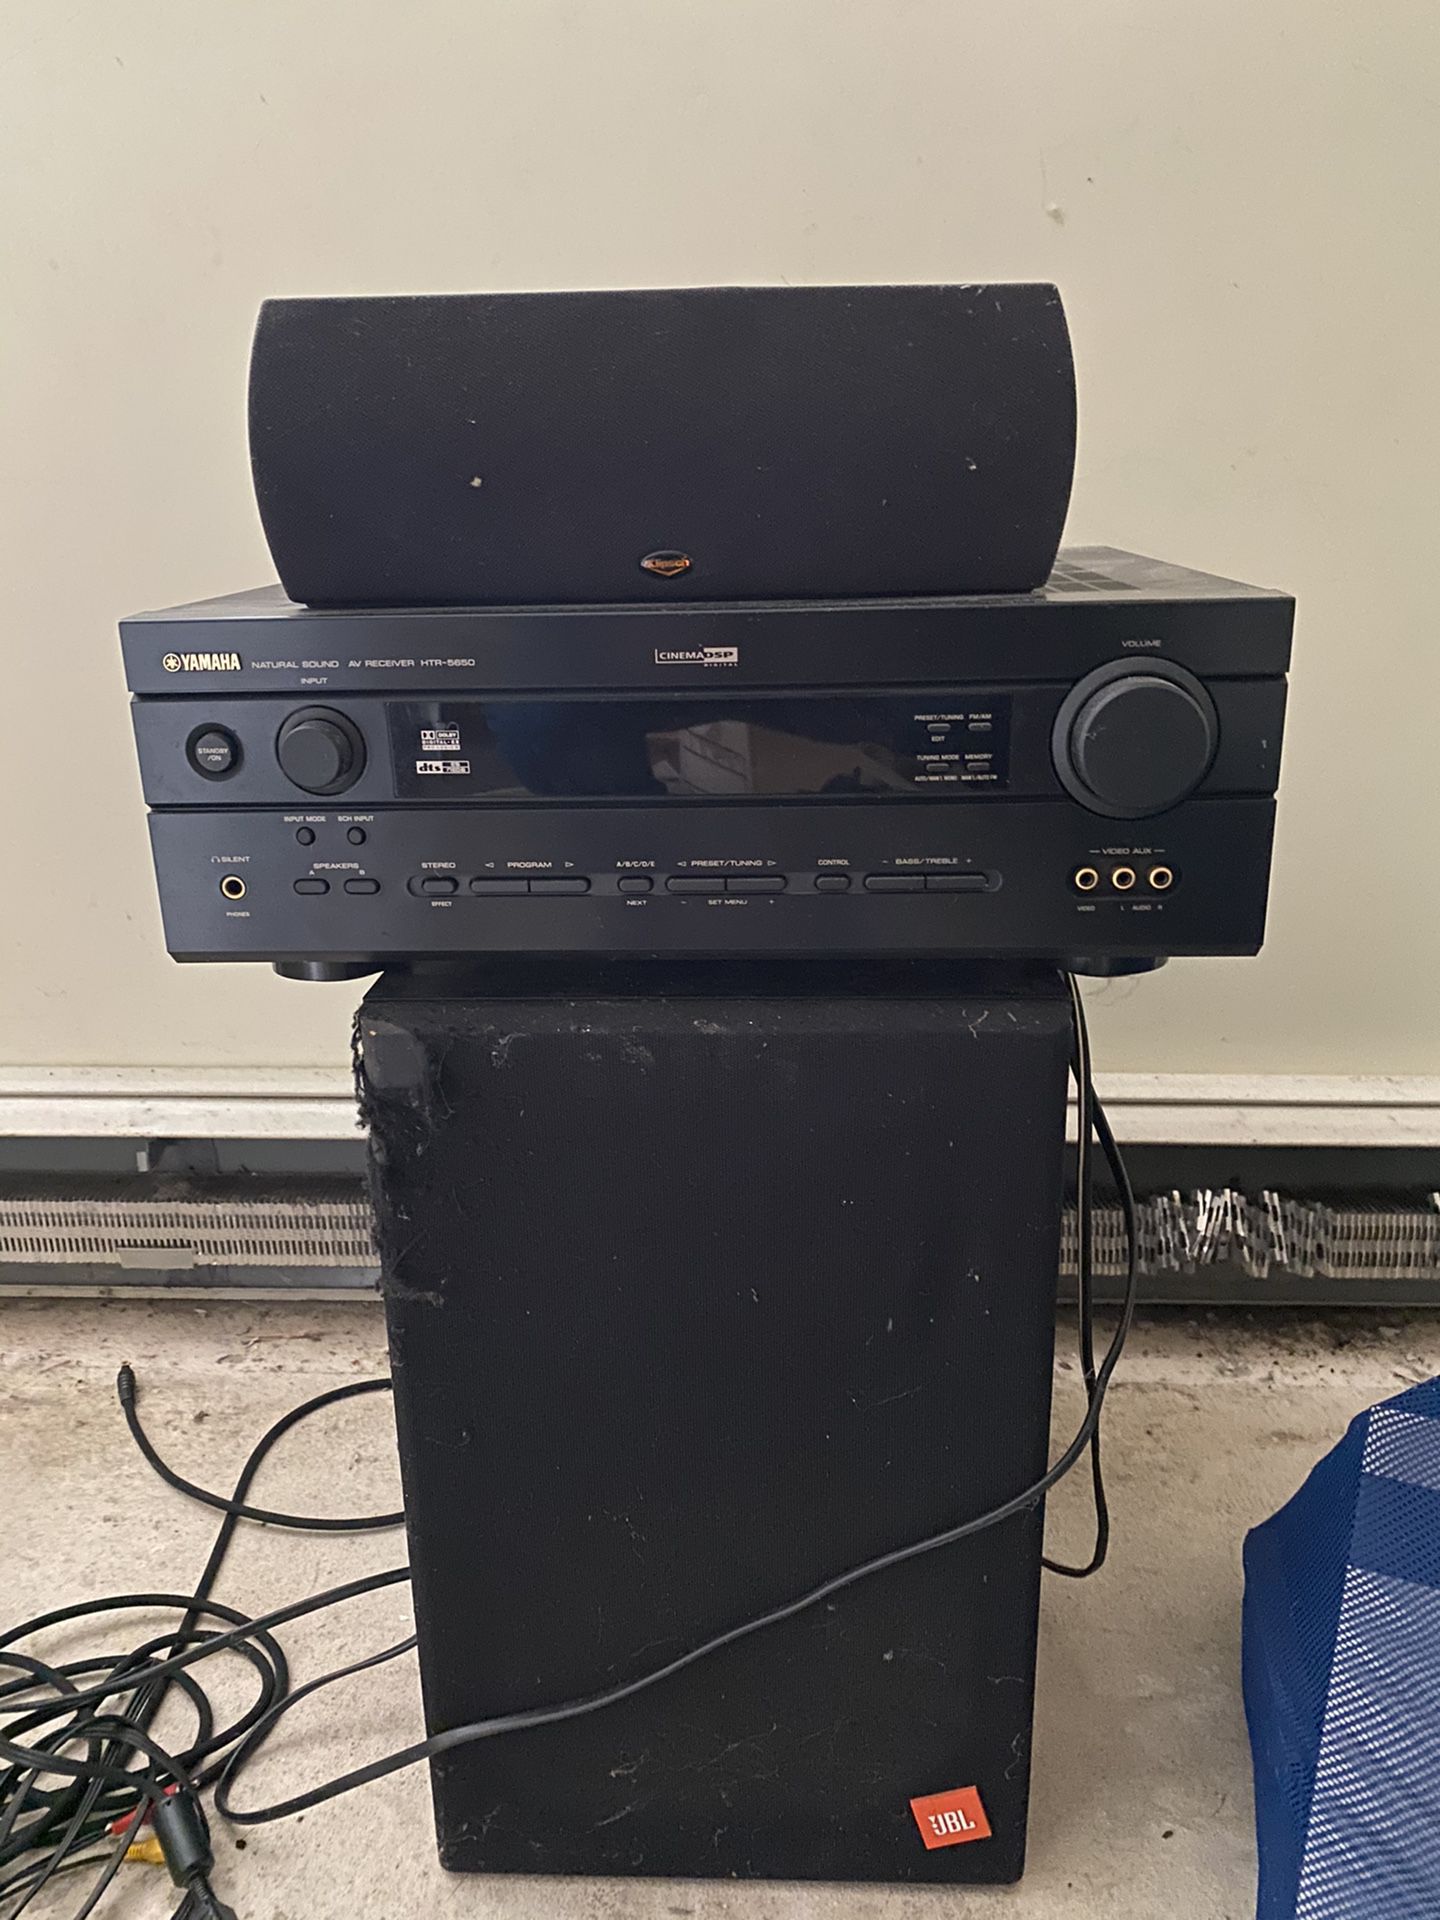 A whole stereo system for $100